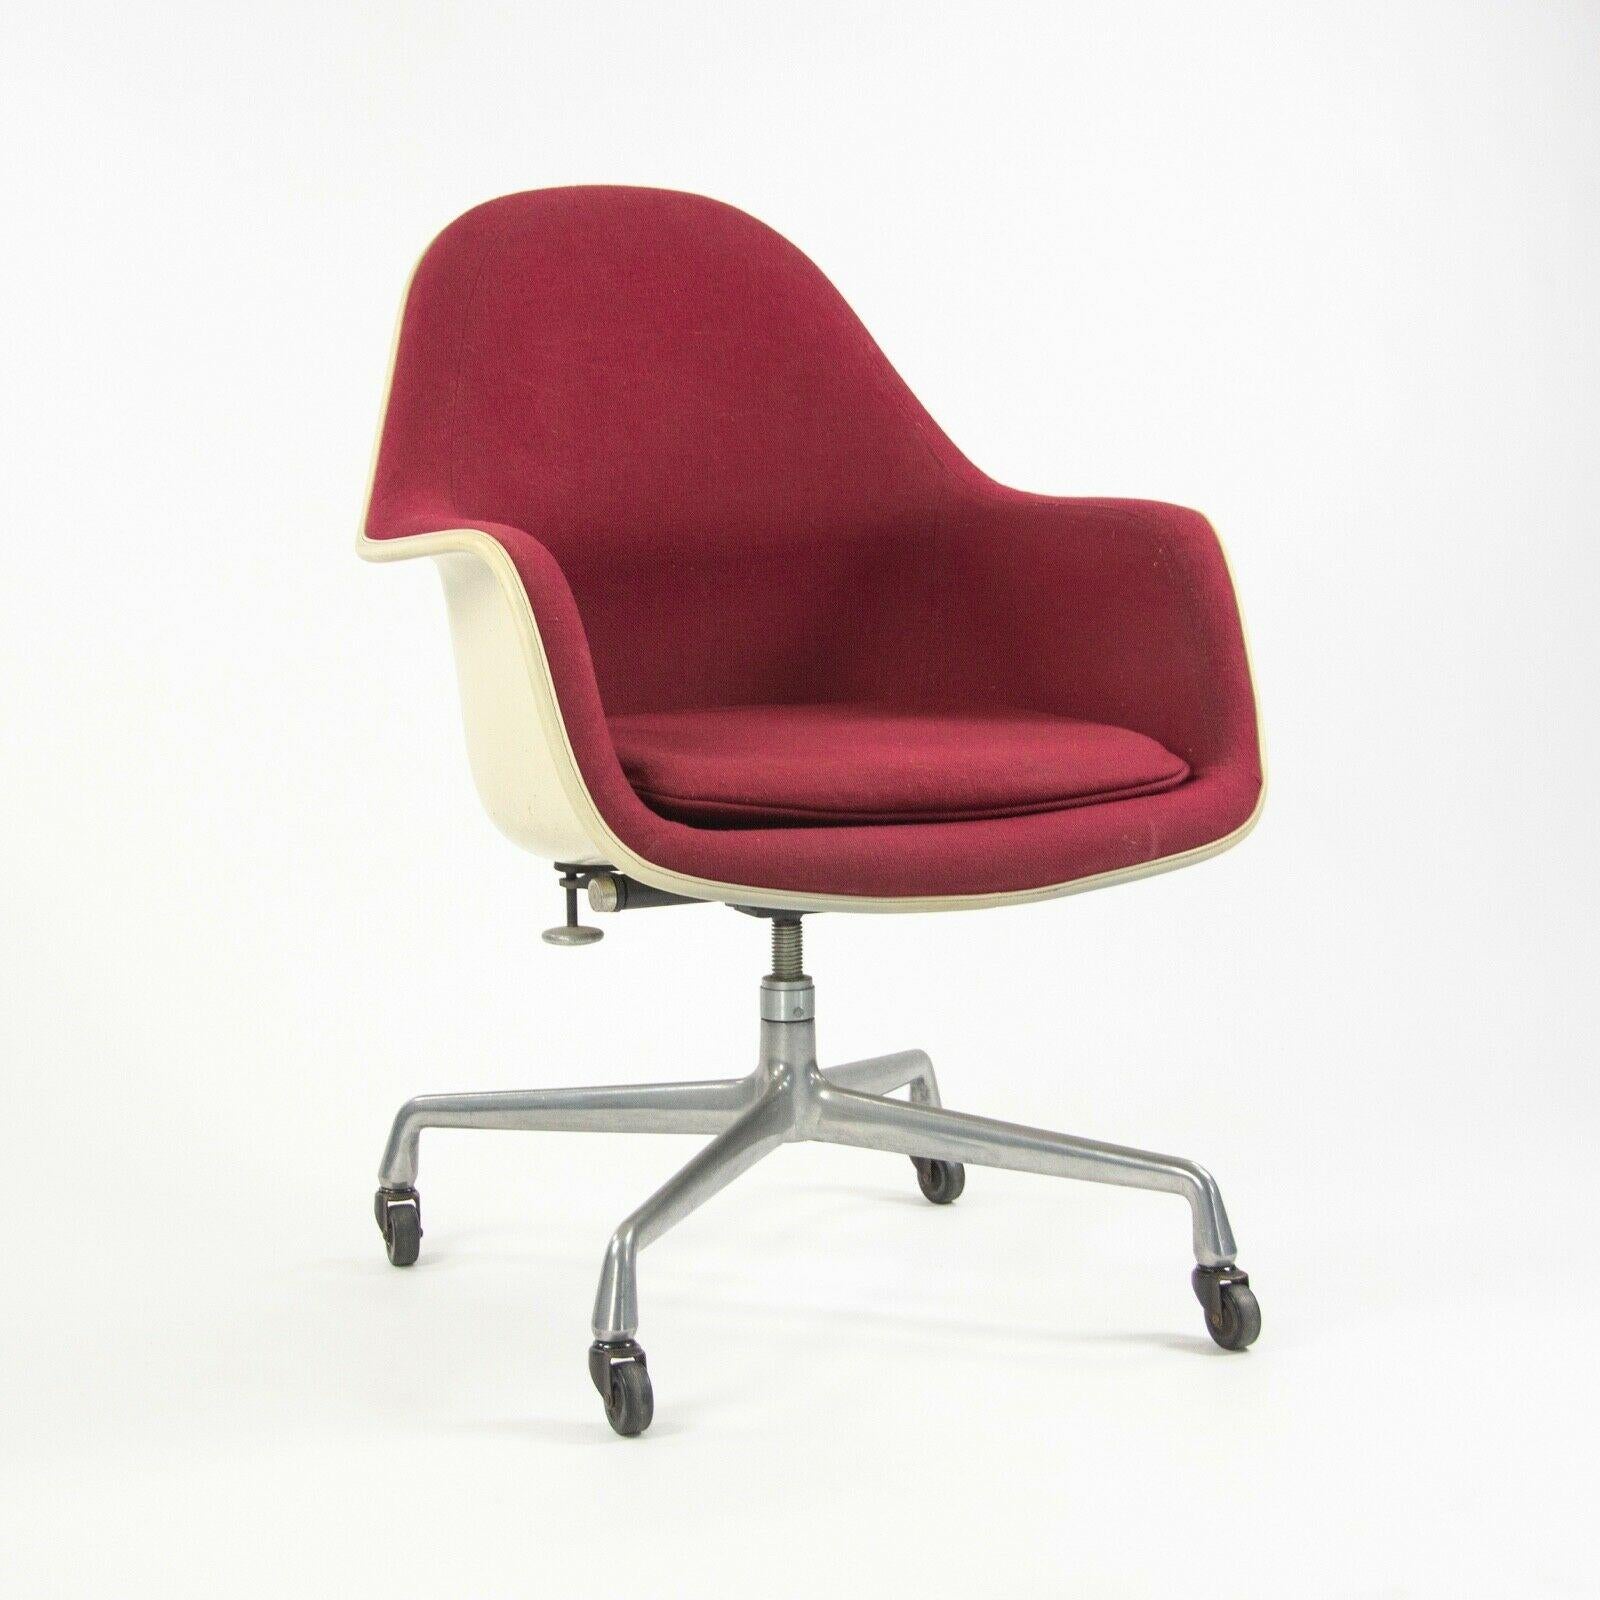 
Listed for sale is a rare and marvelous EC175-8 chair, designed by Charles and Ray Eames, produced by Herman Miller. This is one of the more unique and later Eames designs, building upon the 1950's fiberglass innovations, though suiting different